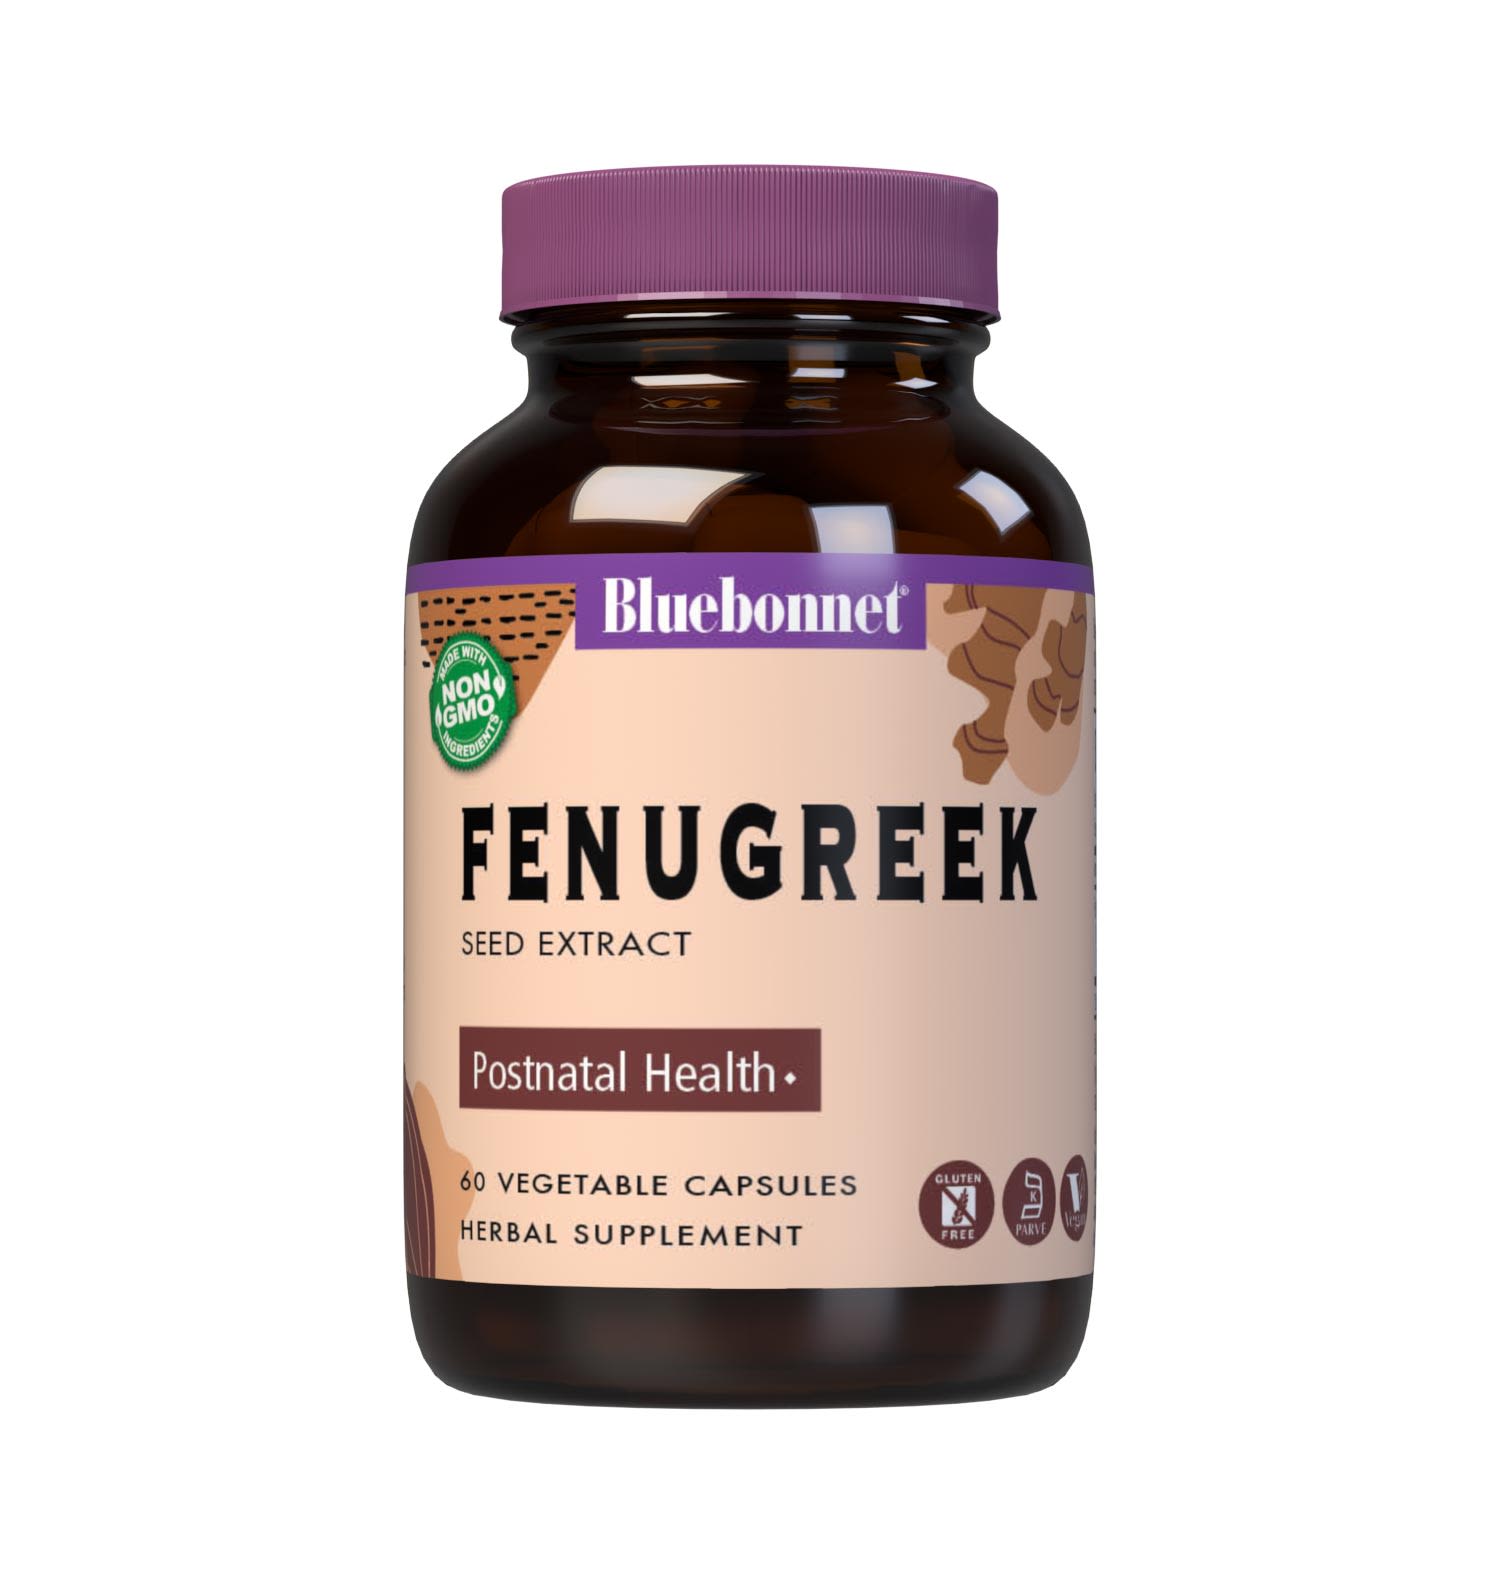 Bluebonnet’s Fenugreek Seed Extract 60 Vegetable Capsules provide a standardized extract of total saponins, the most researched active constituents found in fenugreek. A clean and gentle water-based extraction method is employed to capture and preserve fenugreek’s most valuable components. #size_60 count